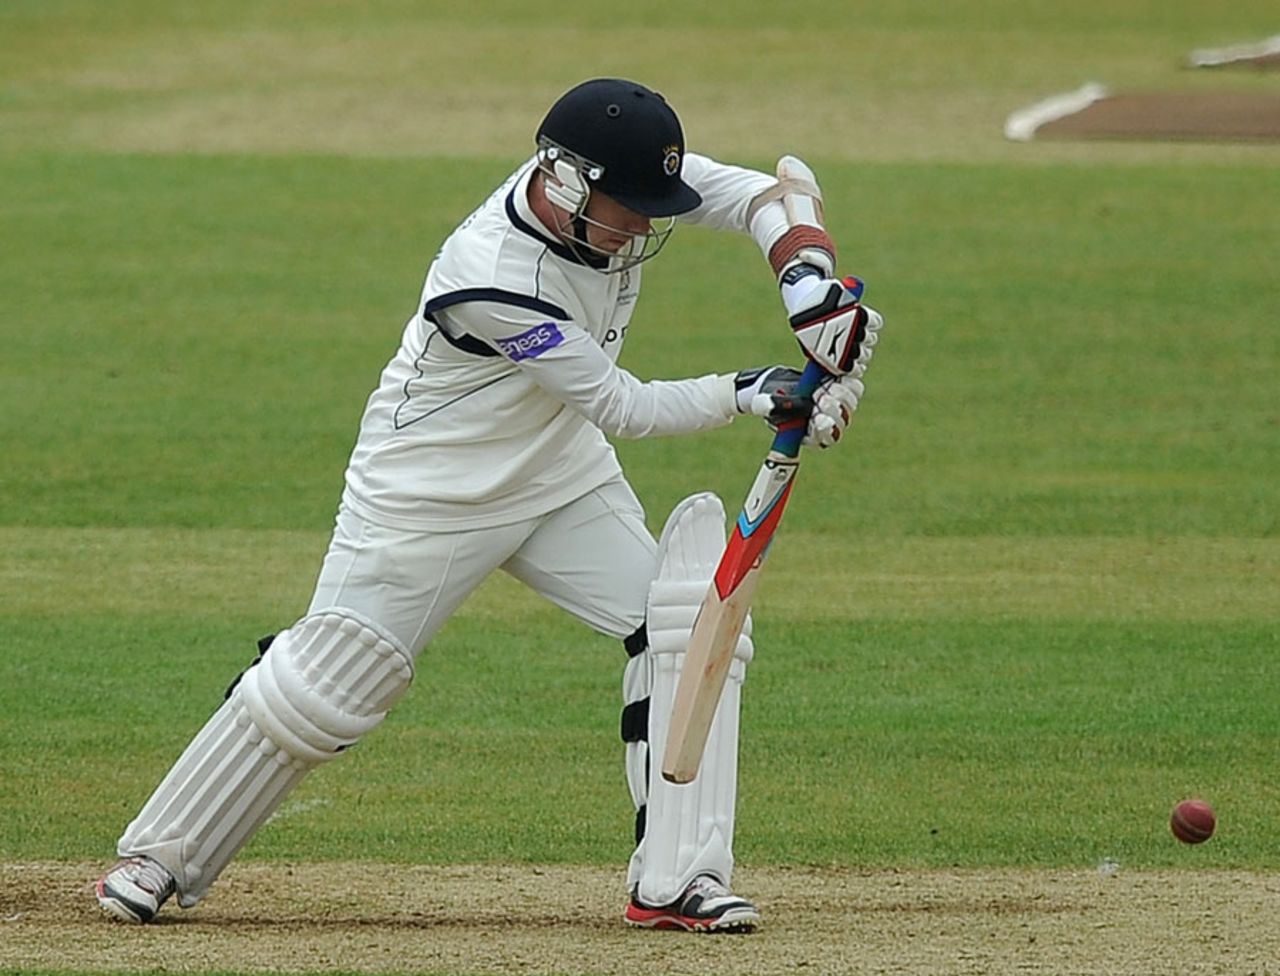 Adam Wheater made his debut for Hampshire, Hampshire v Leicestershire, County Championship, Division Two, Ageas Bowl, 2nd day, April 11, 2013